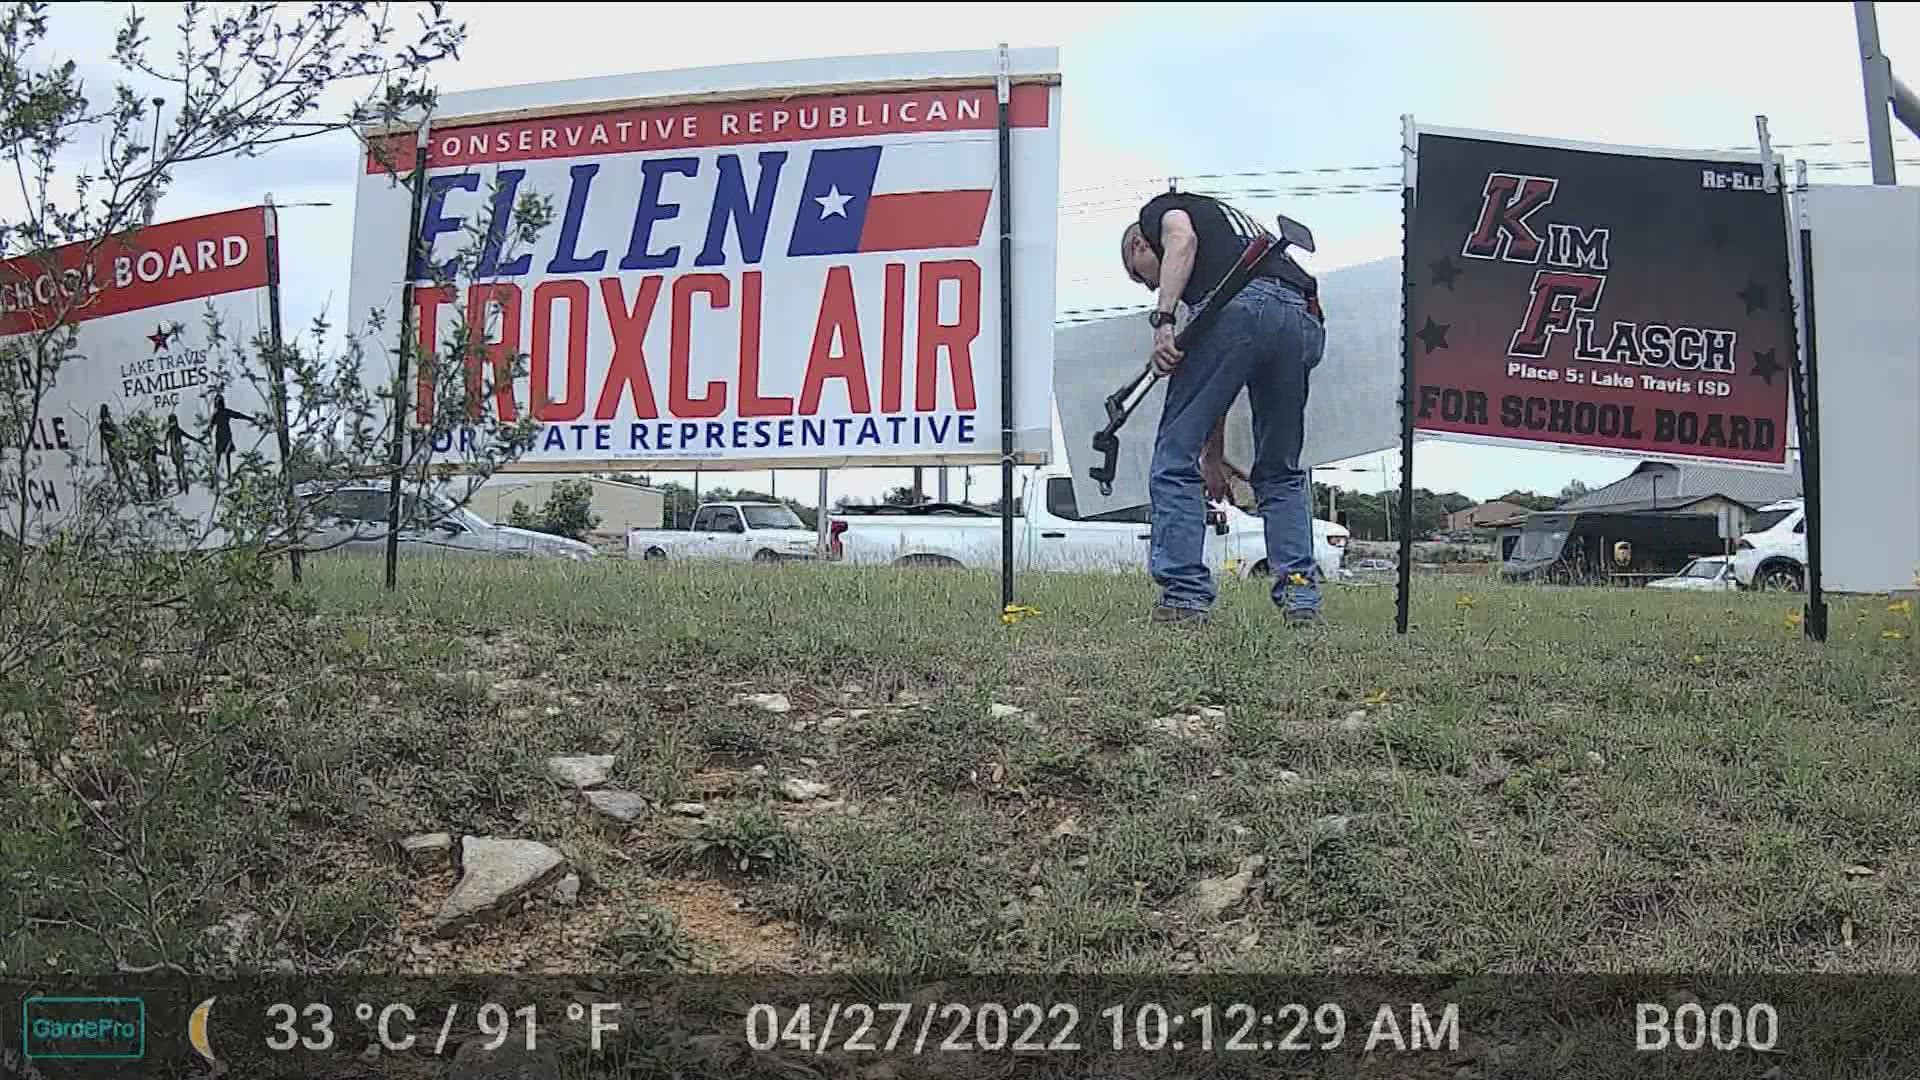 Stealing political signs is a Class C misdemeanor.